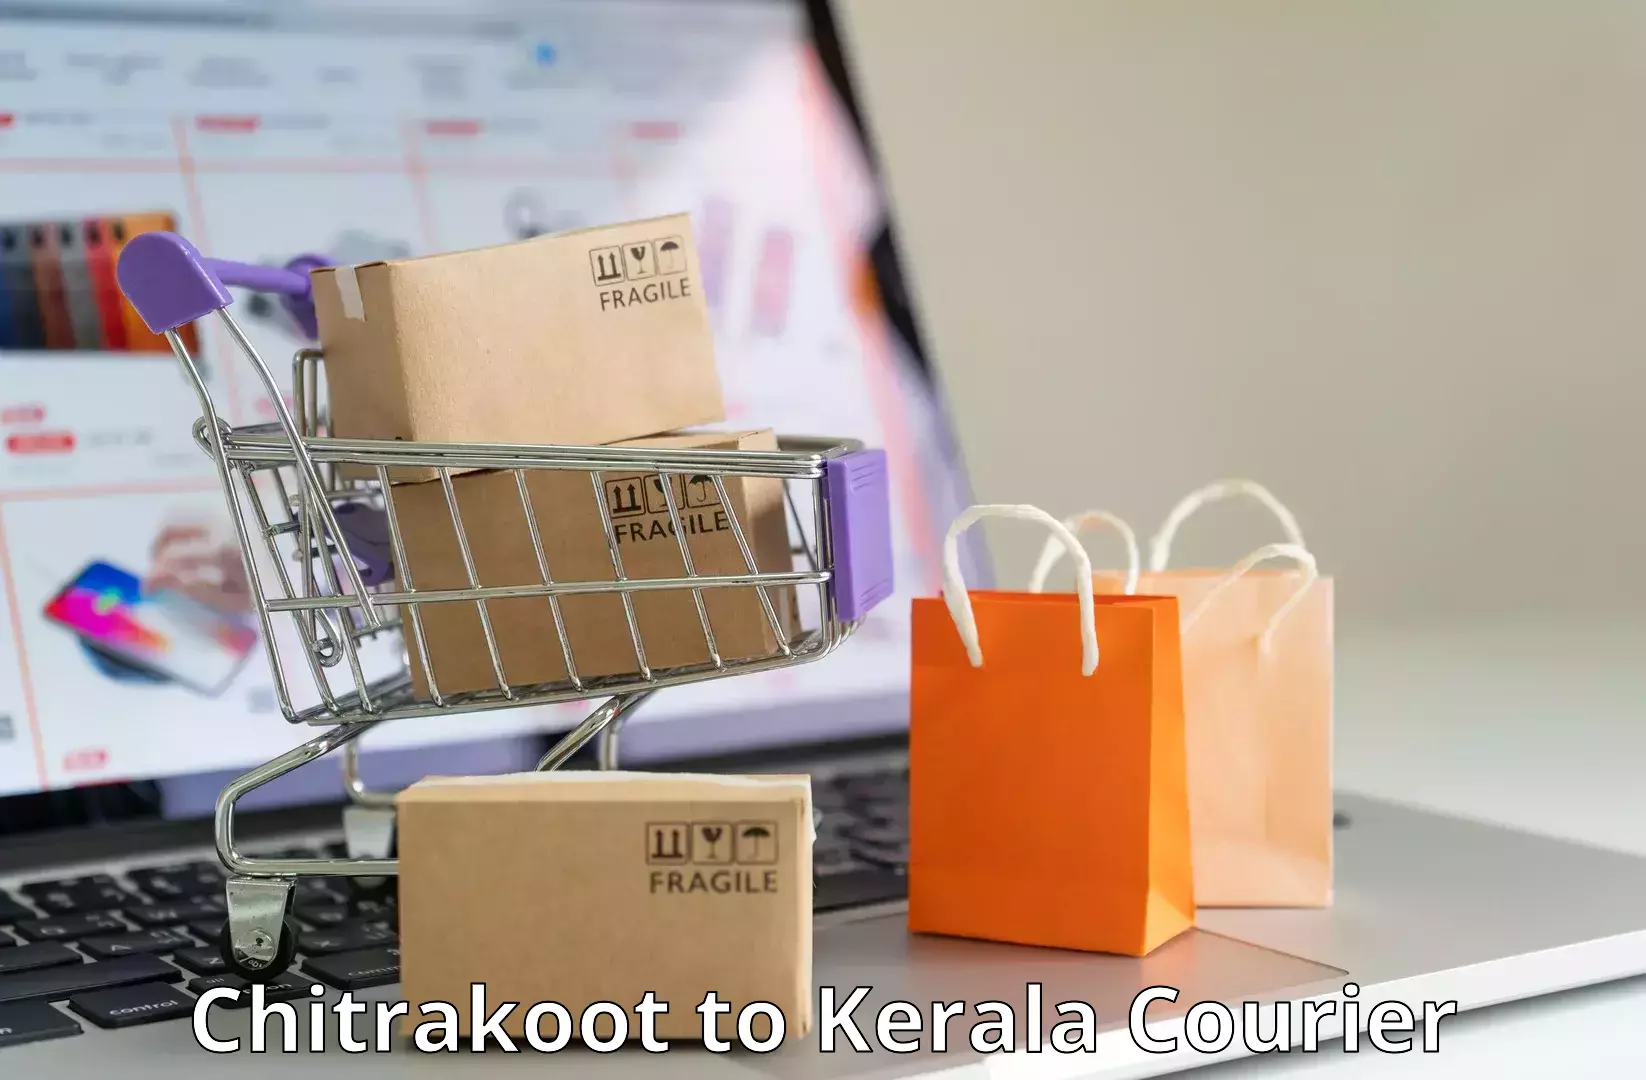 Subscription-based courier Chitrakoot to Koothattukulam